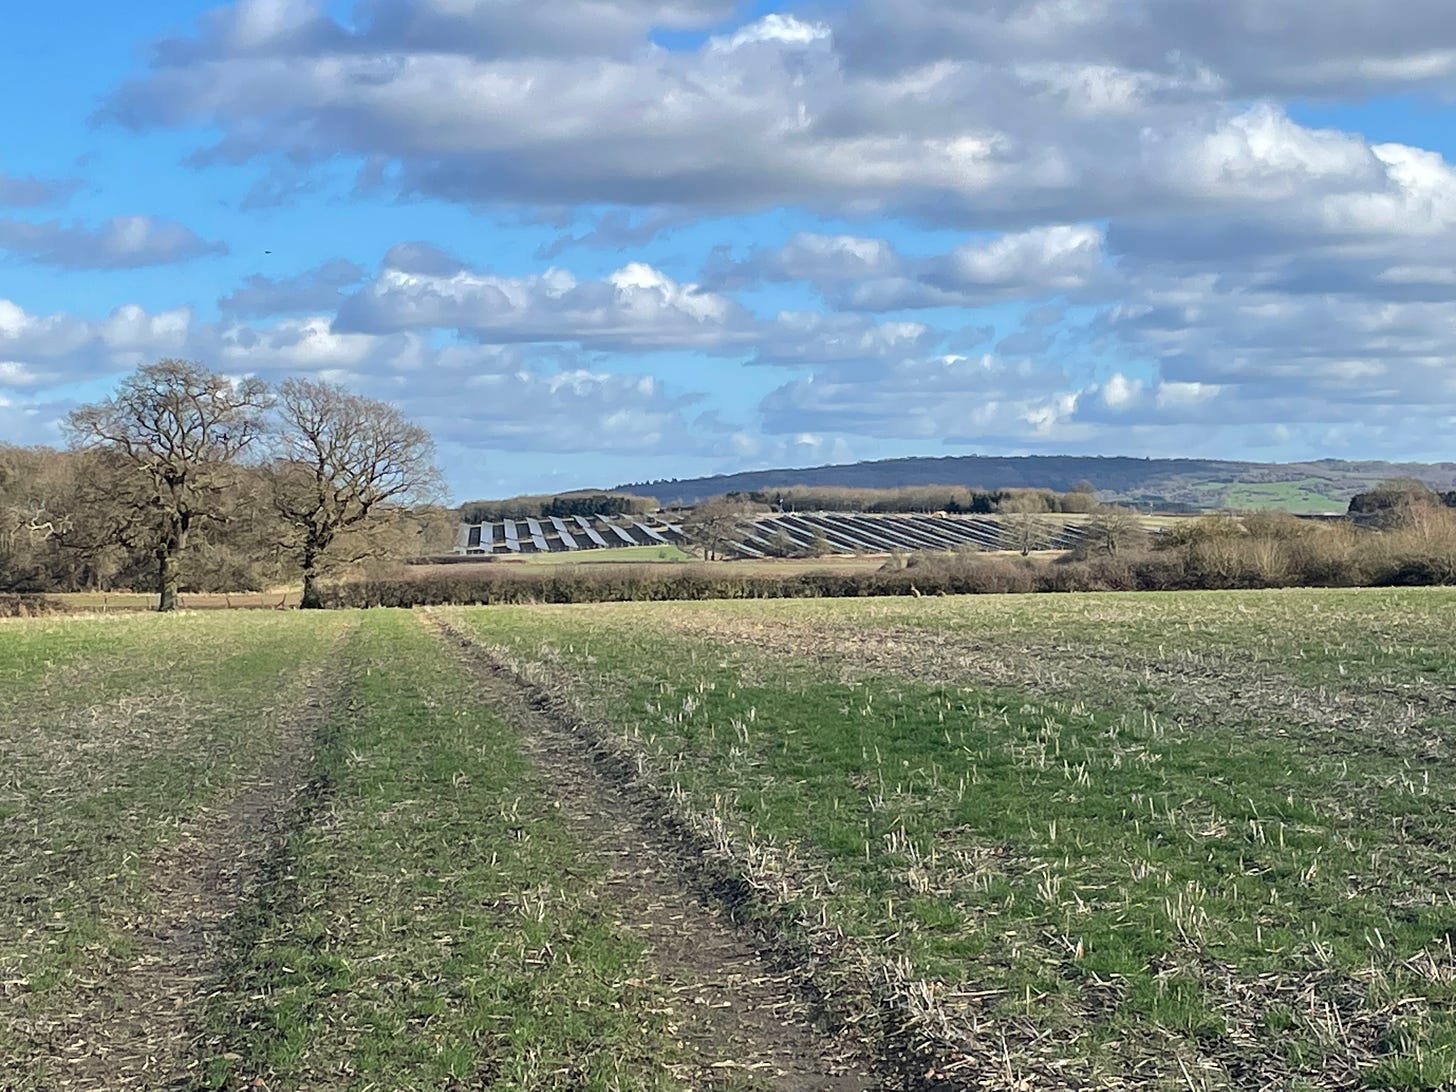 A field with solar panels in the background and clouds